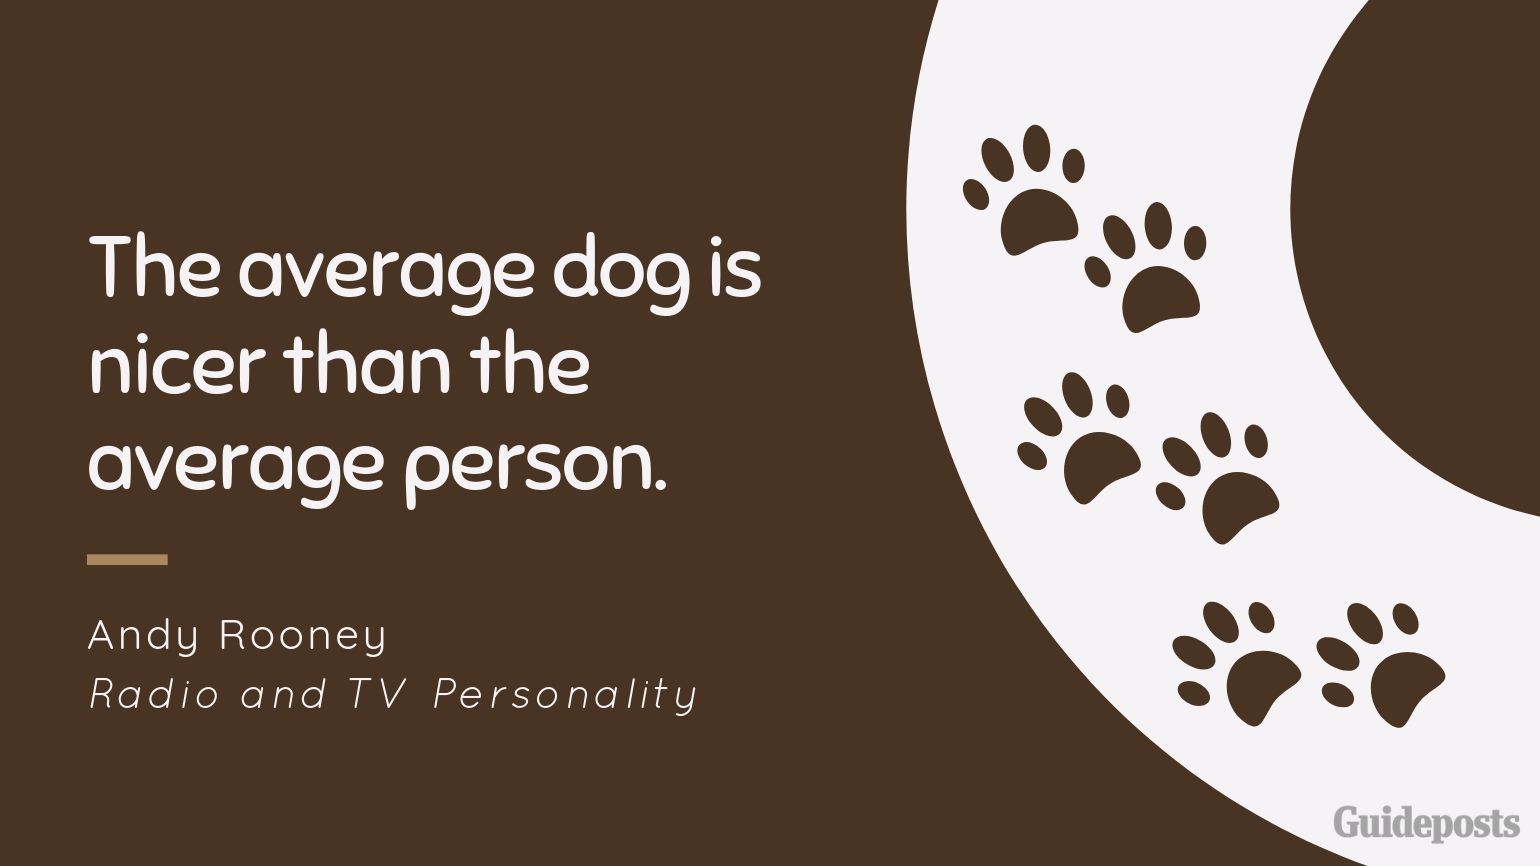 Sentimental Dog Quote: The average dog is nicer than the average person. —Andy Rooney, Radio and TV Personality dog lover